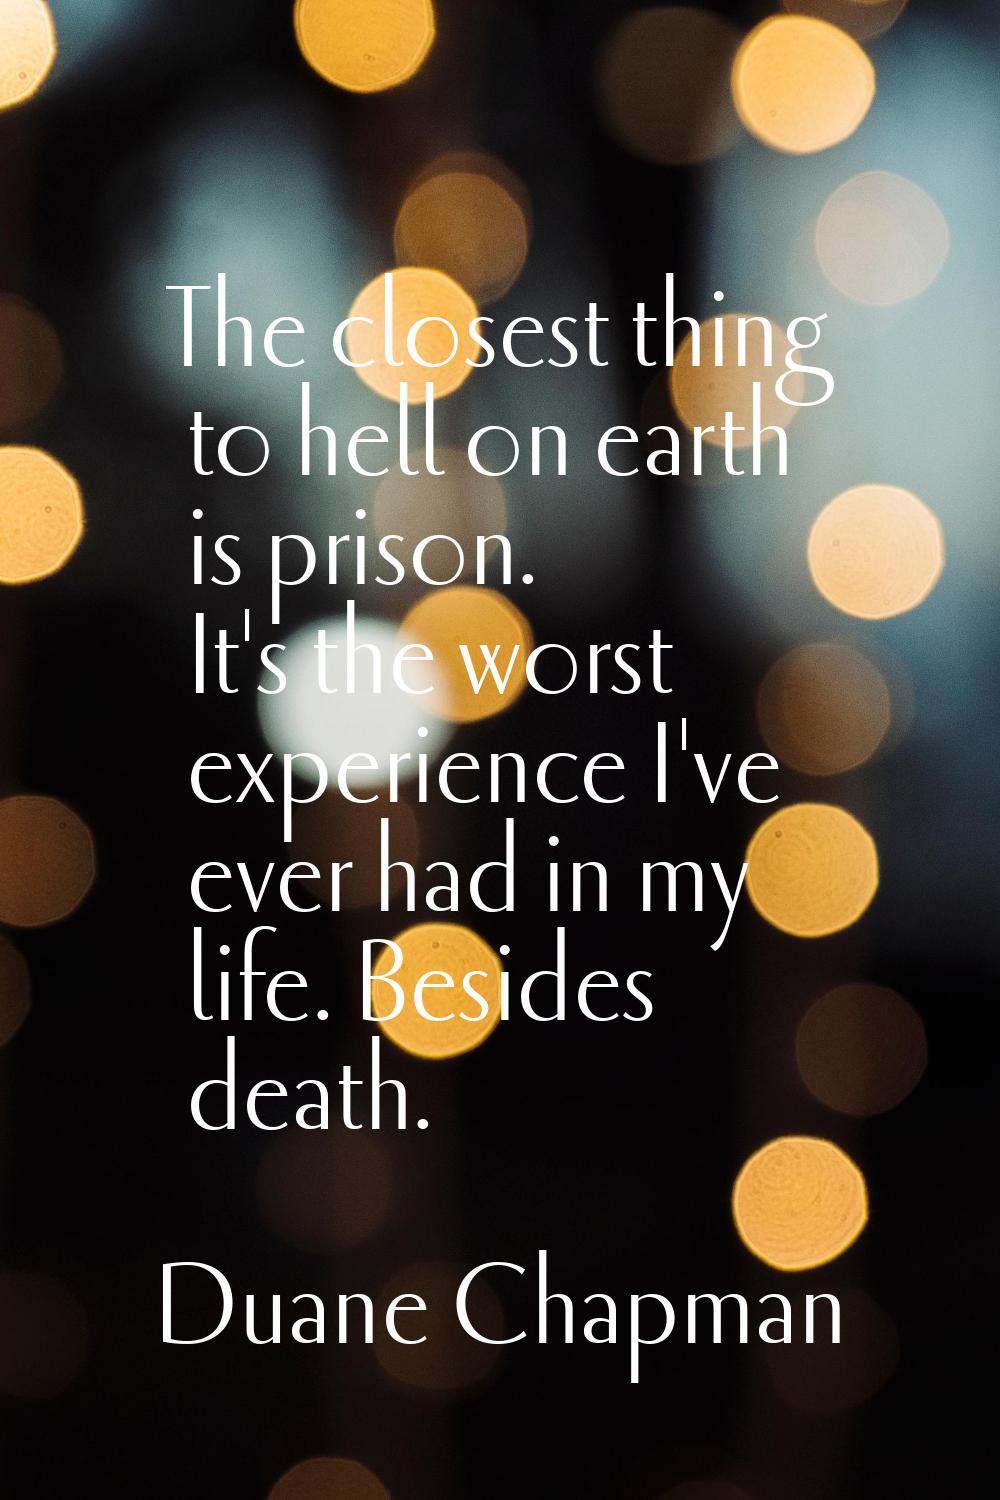 The closest thing to hell on earth is prison. It's the worst experience I've ever had in my life. B